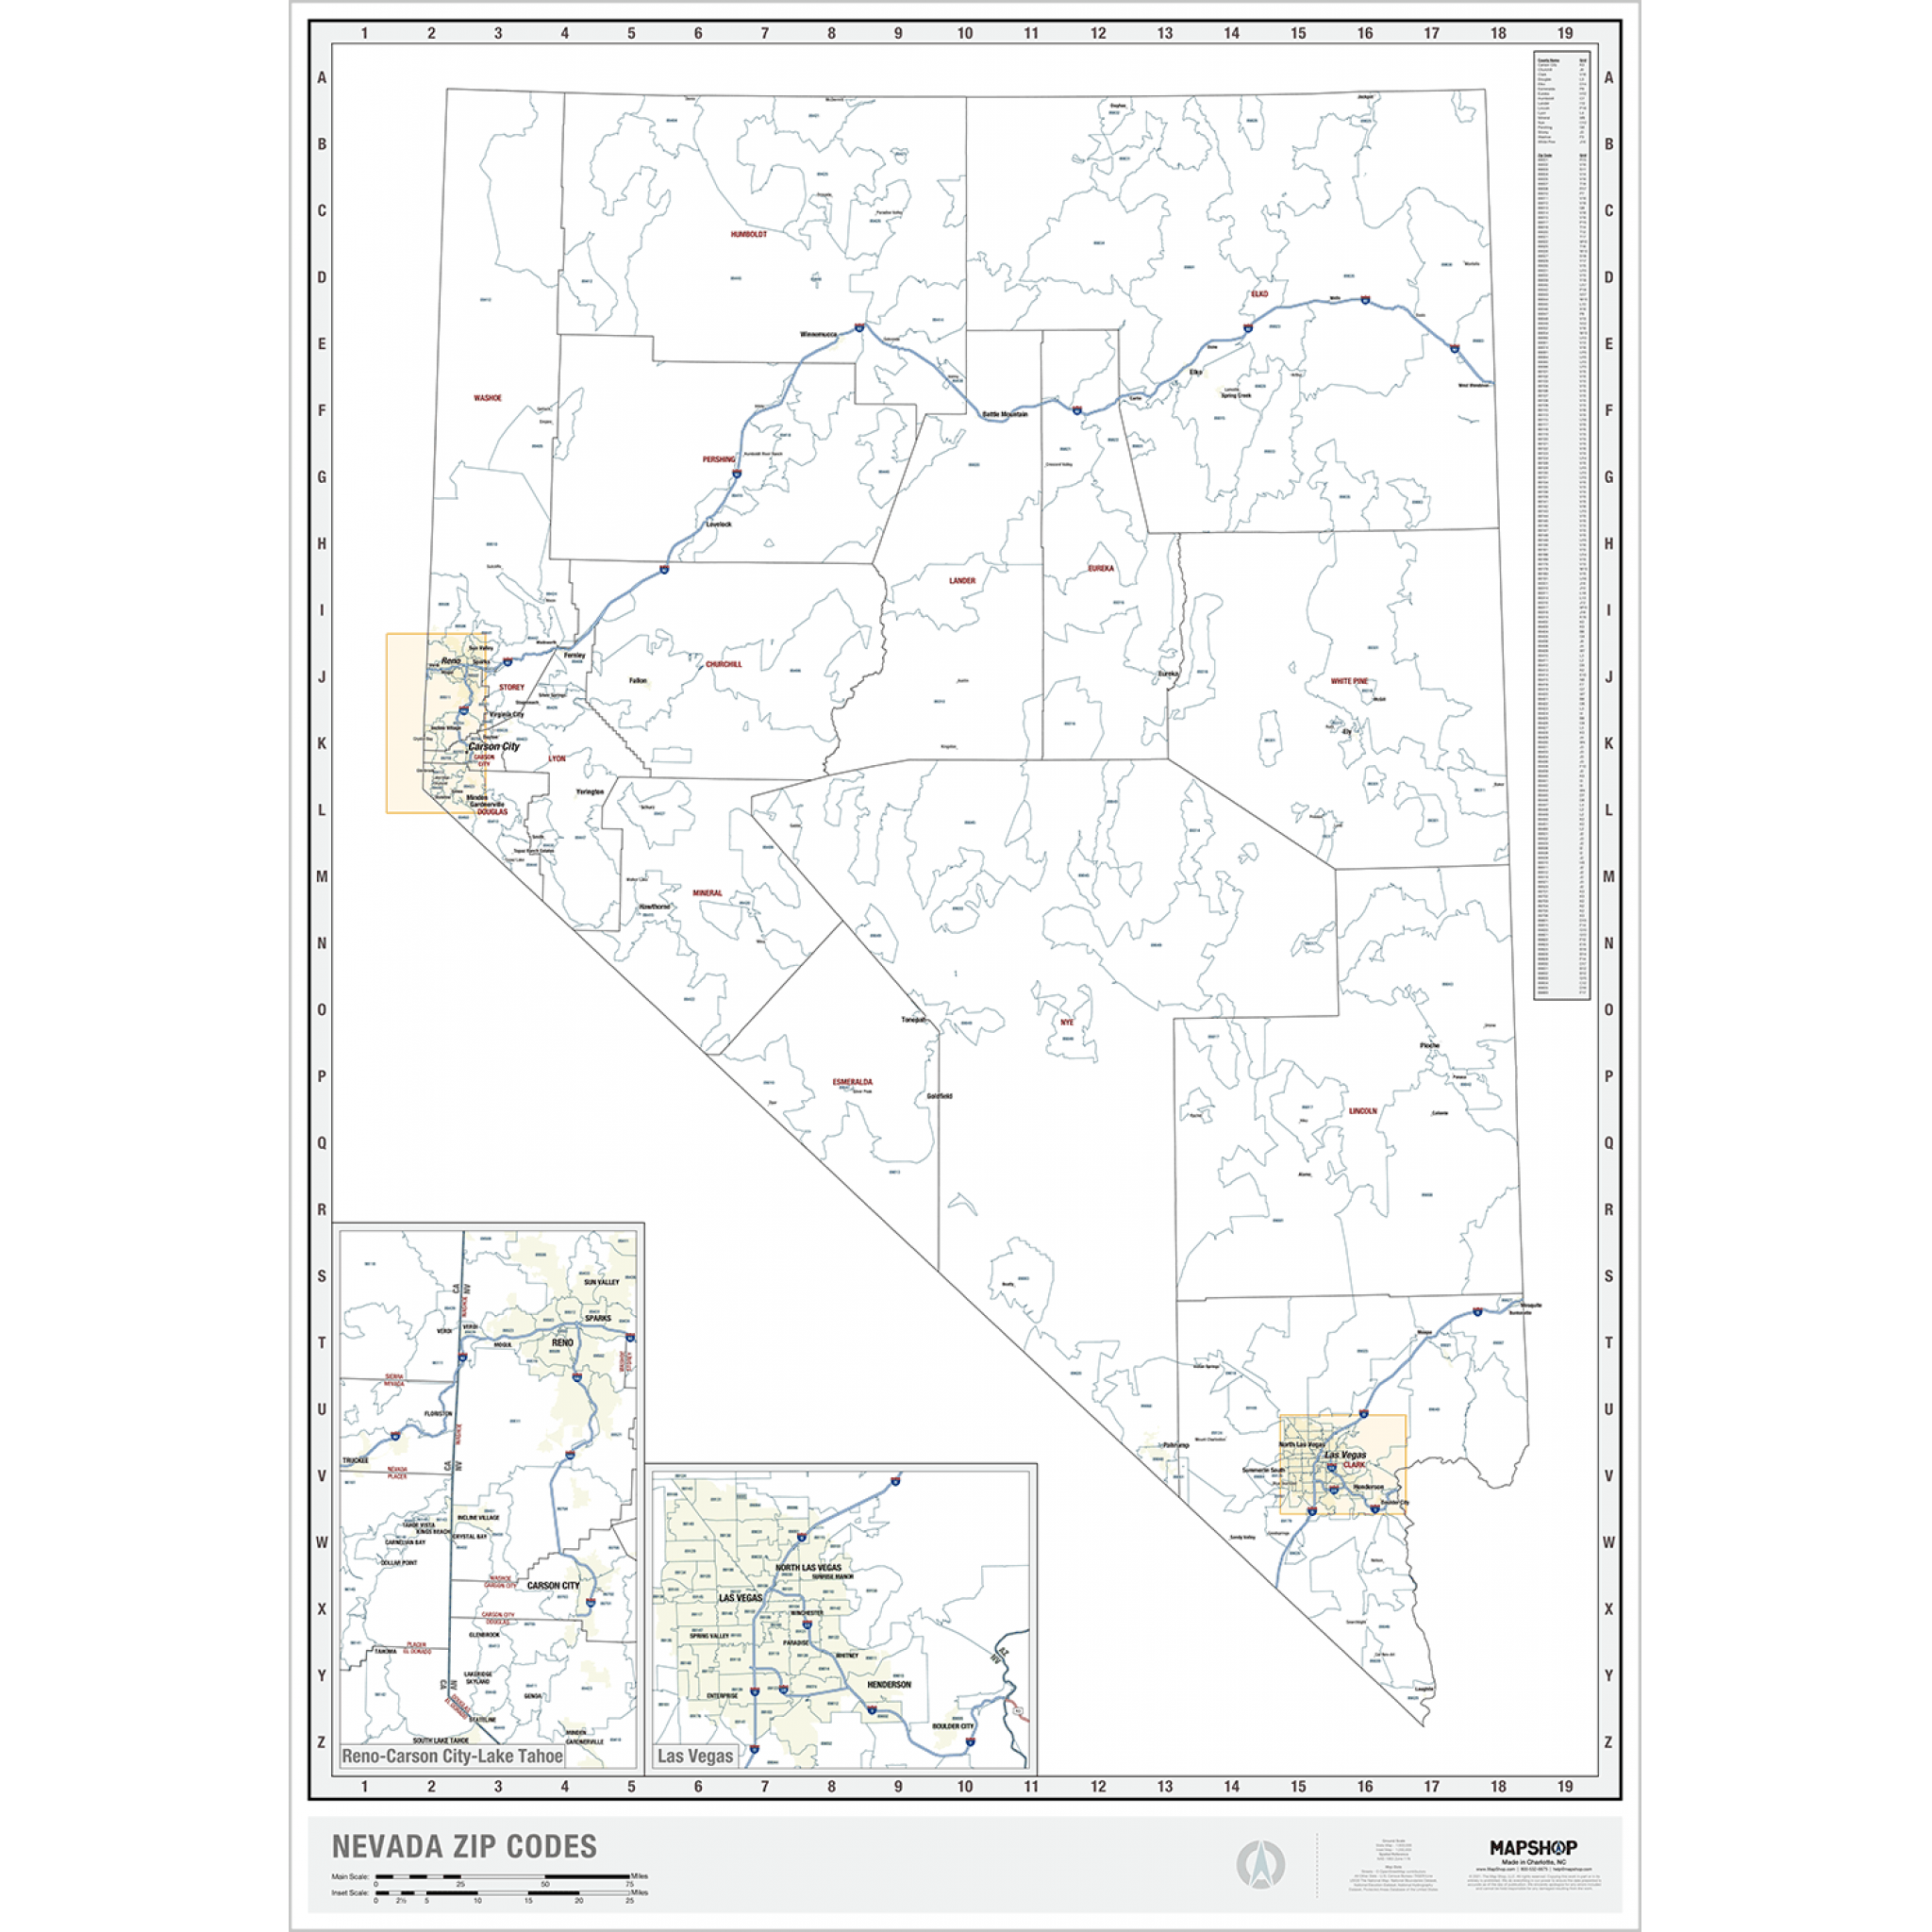 Nevada Zip Code Wall Map By Mapshop The Map Shop 3524